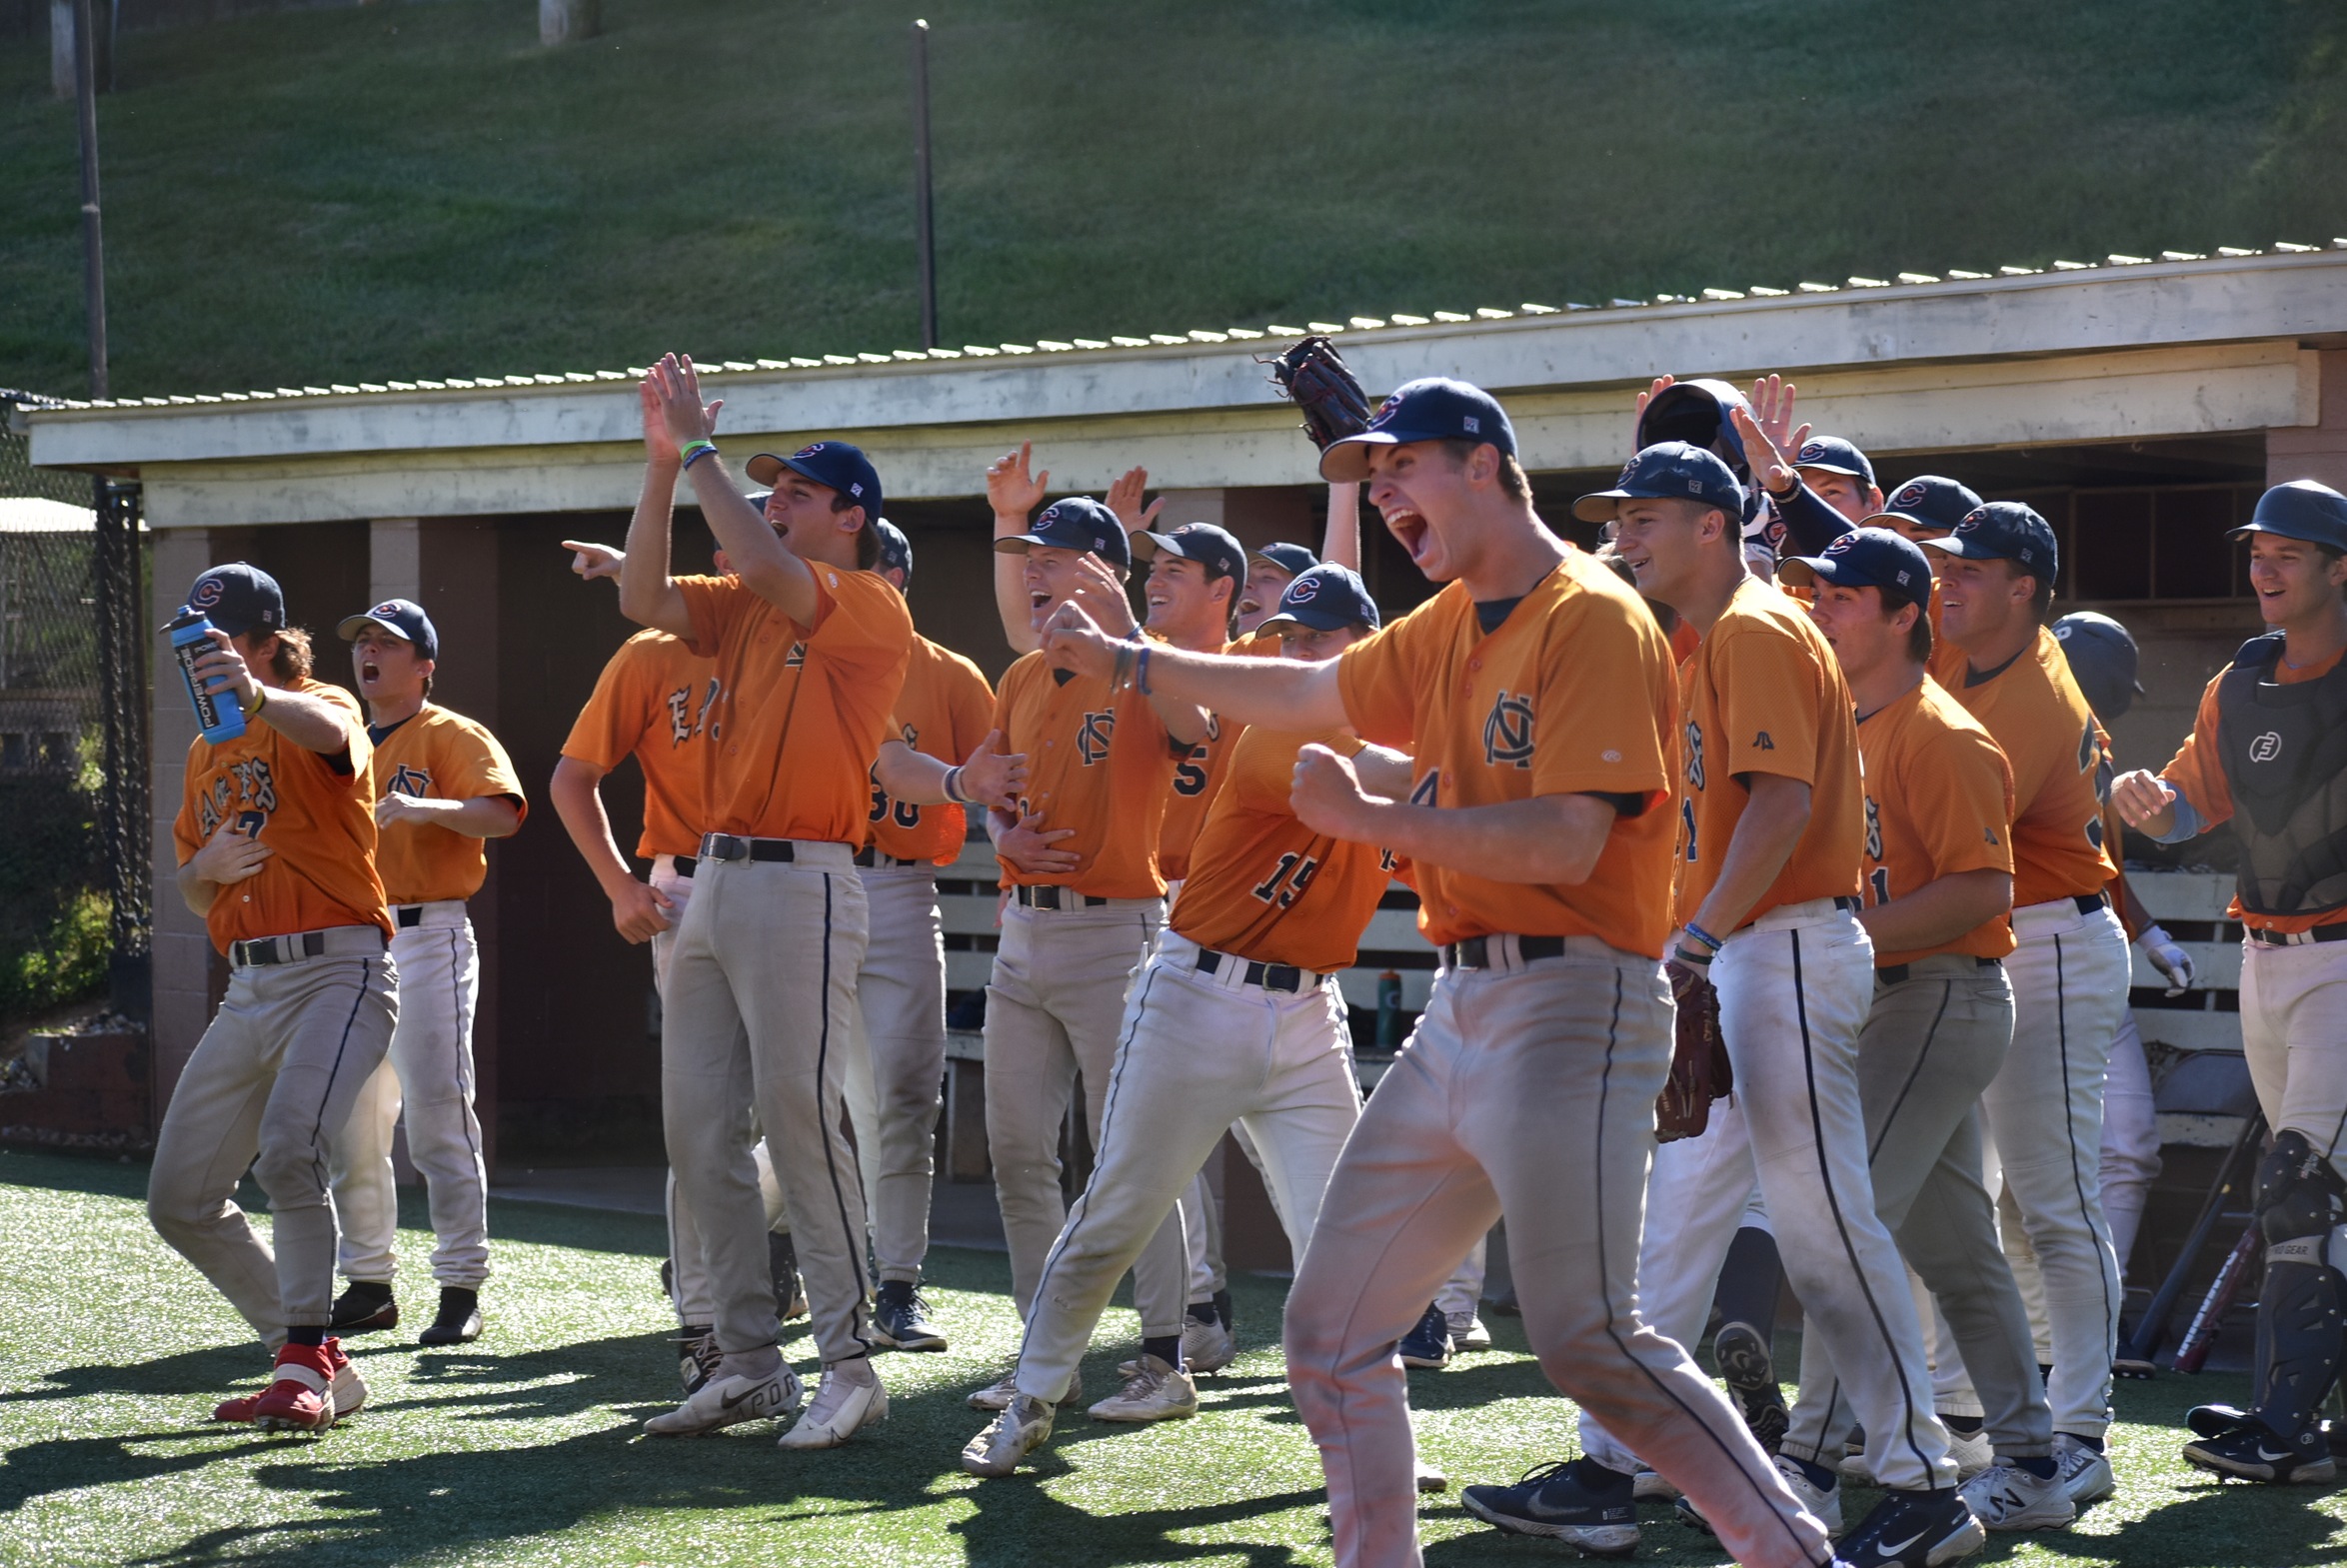 Quick-hitting Orange holds off Blue to take game one